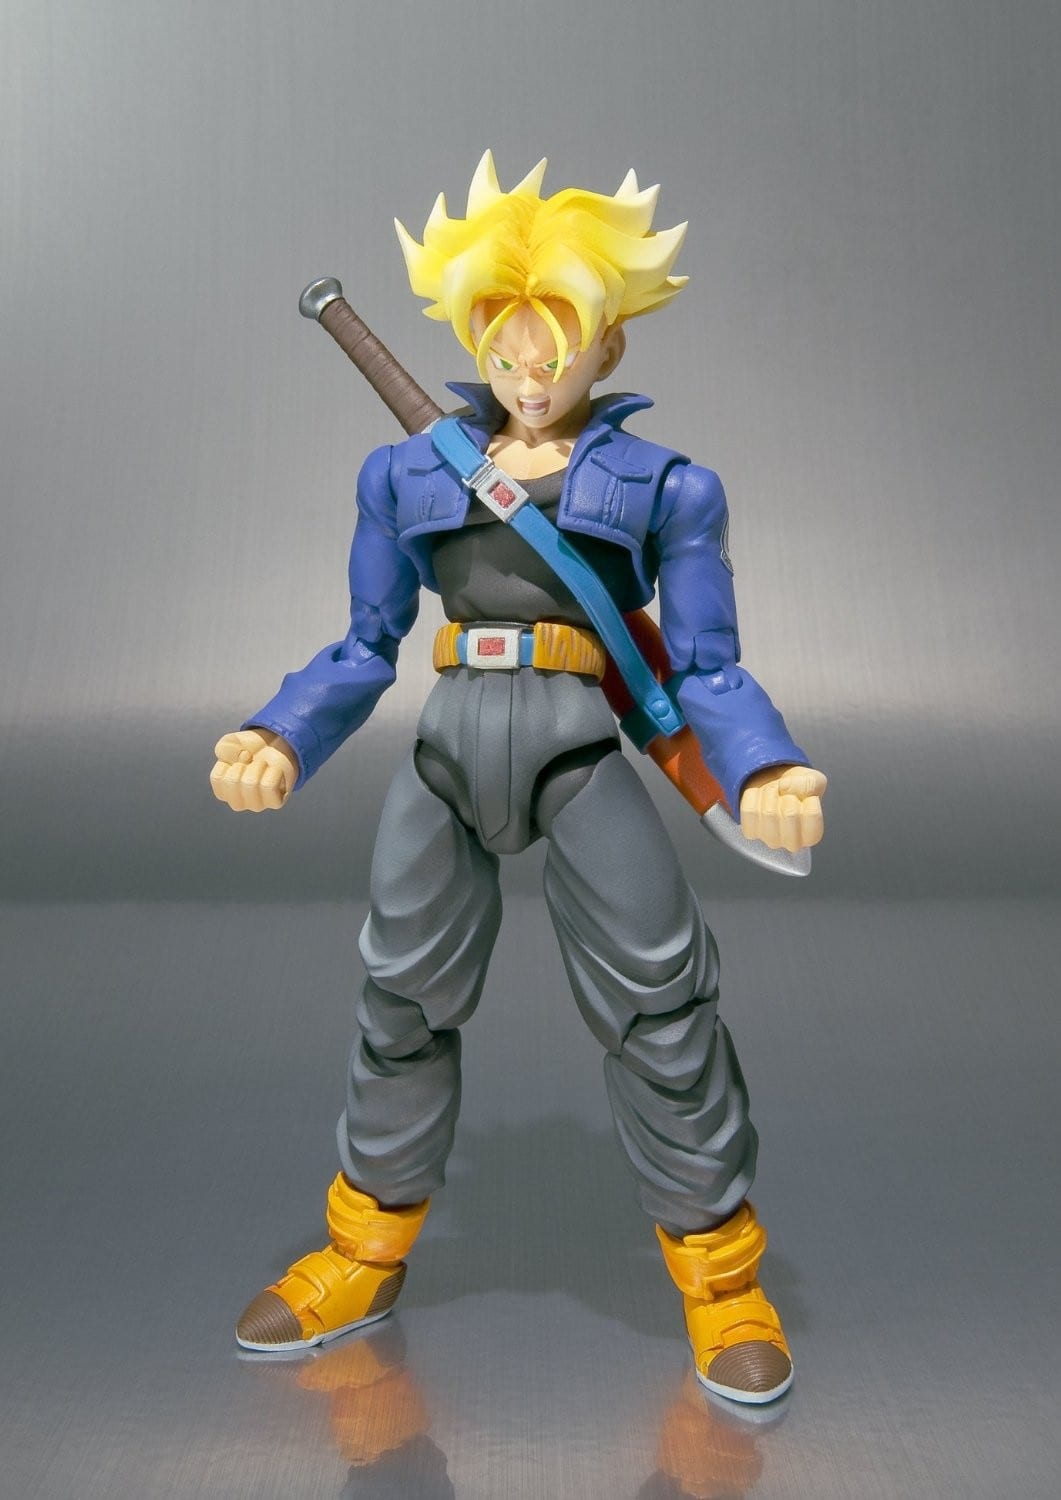 Picture of S.H. Figuarts Dragonball Z Trunks Action Figure